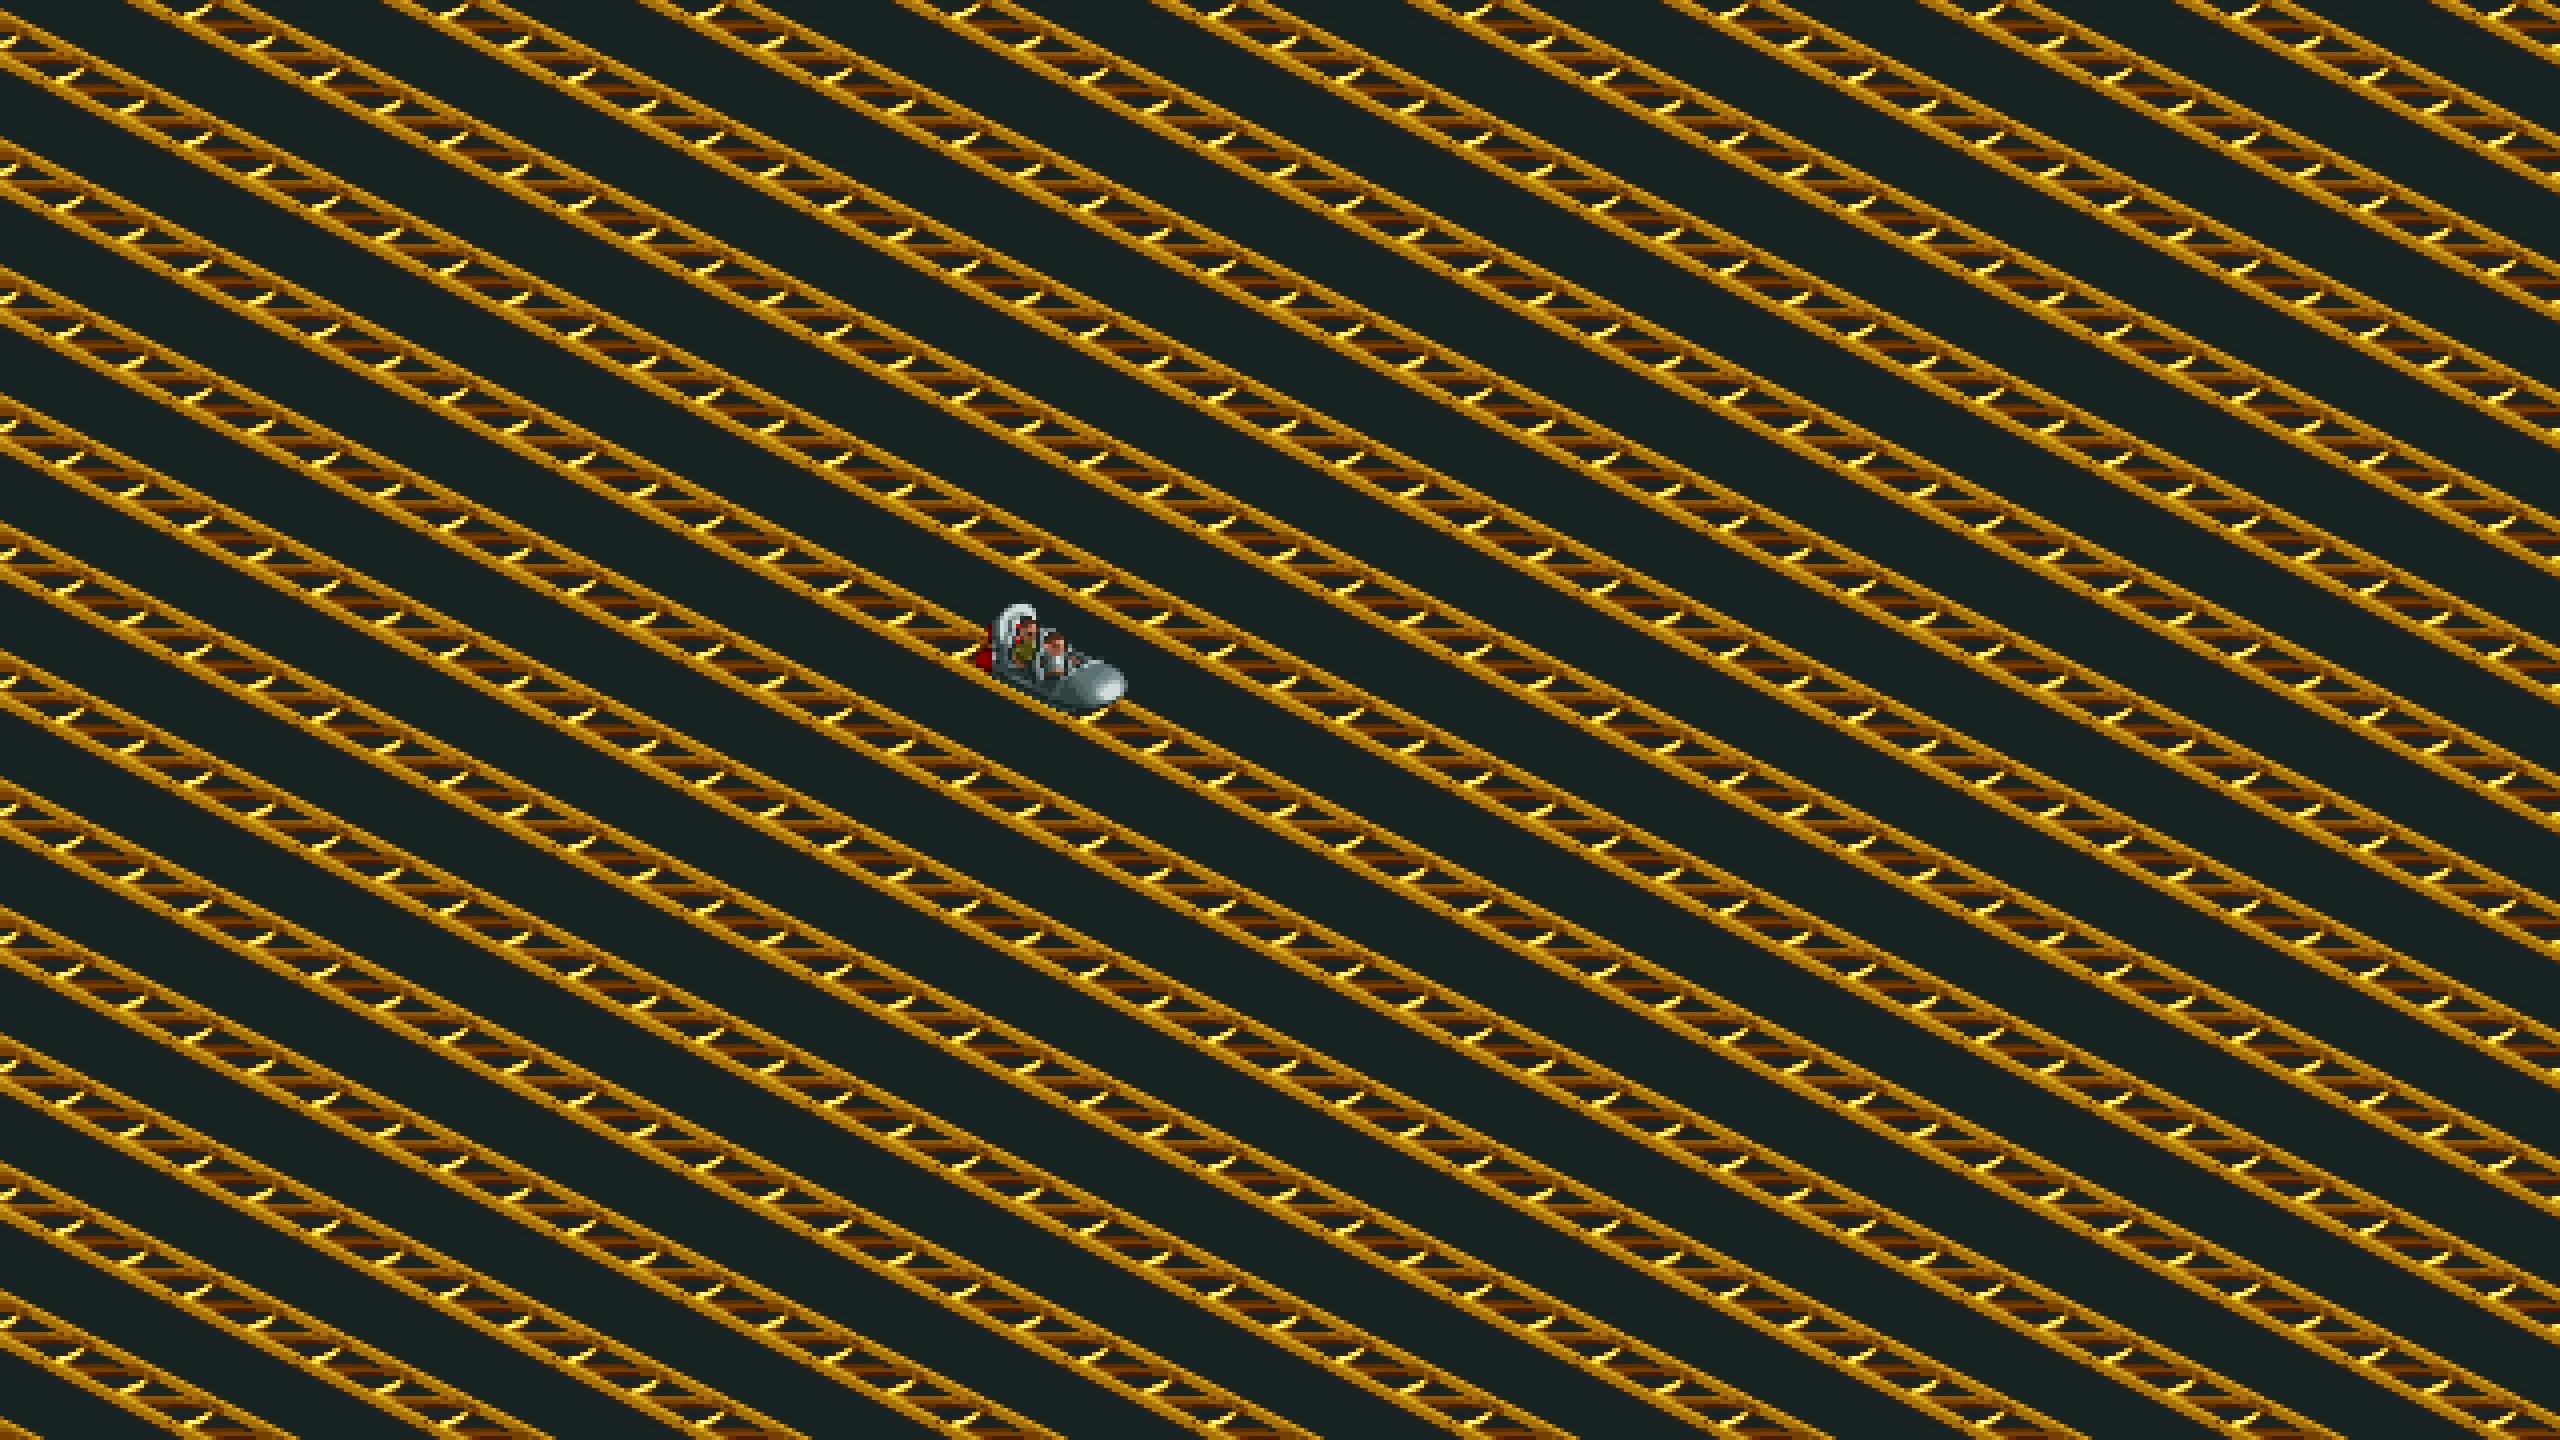 A screenshot shows a single roller coaster car trapped in a huge maze of tracks.